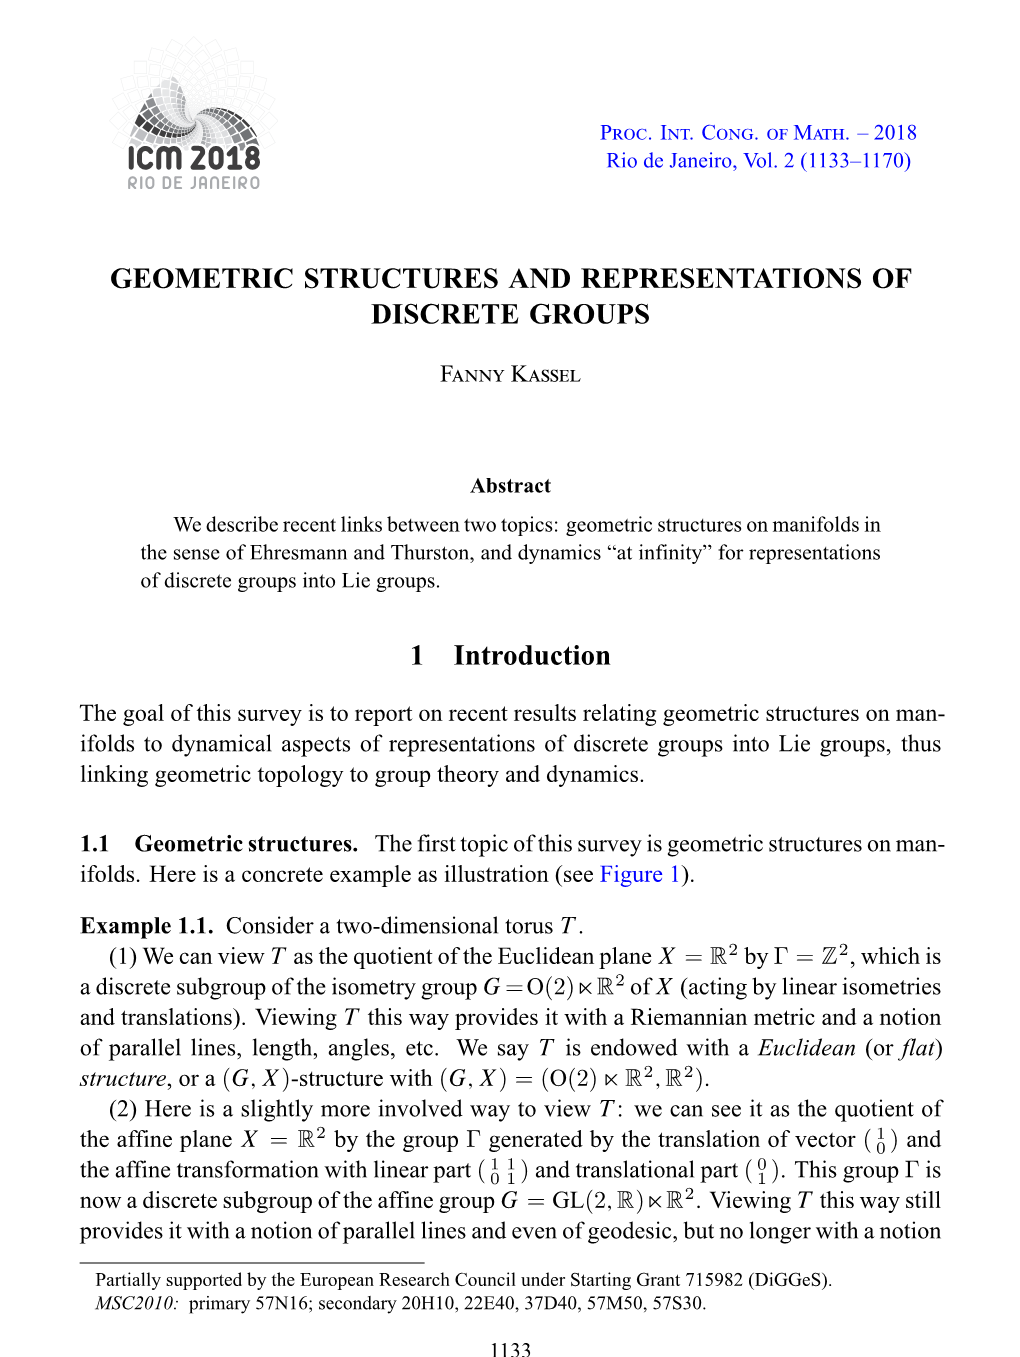 Geometric Structures and Representations of Discrete Groups